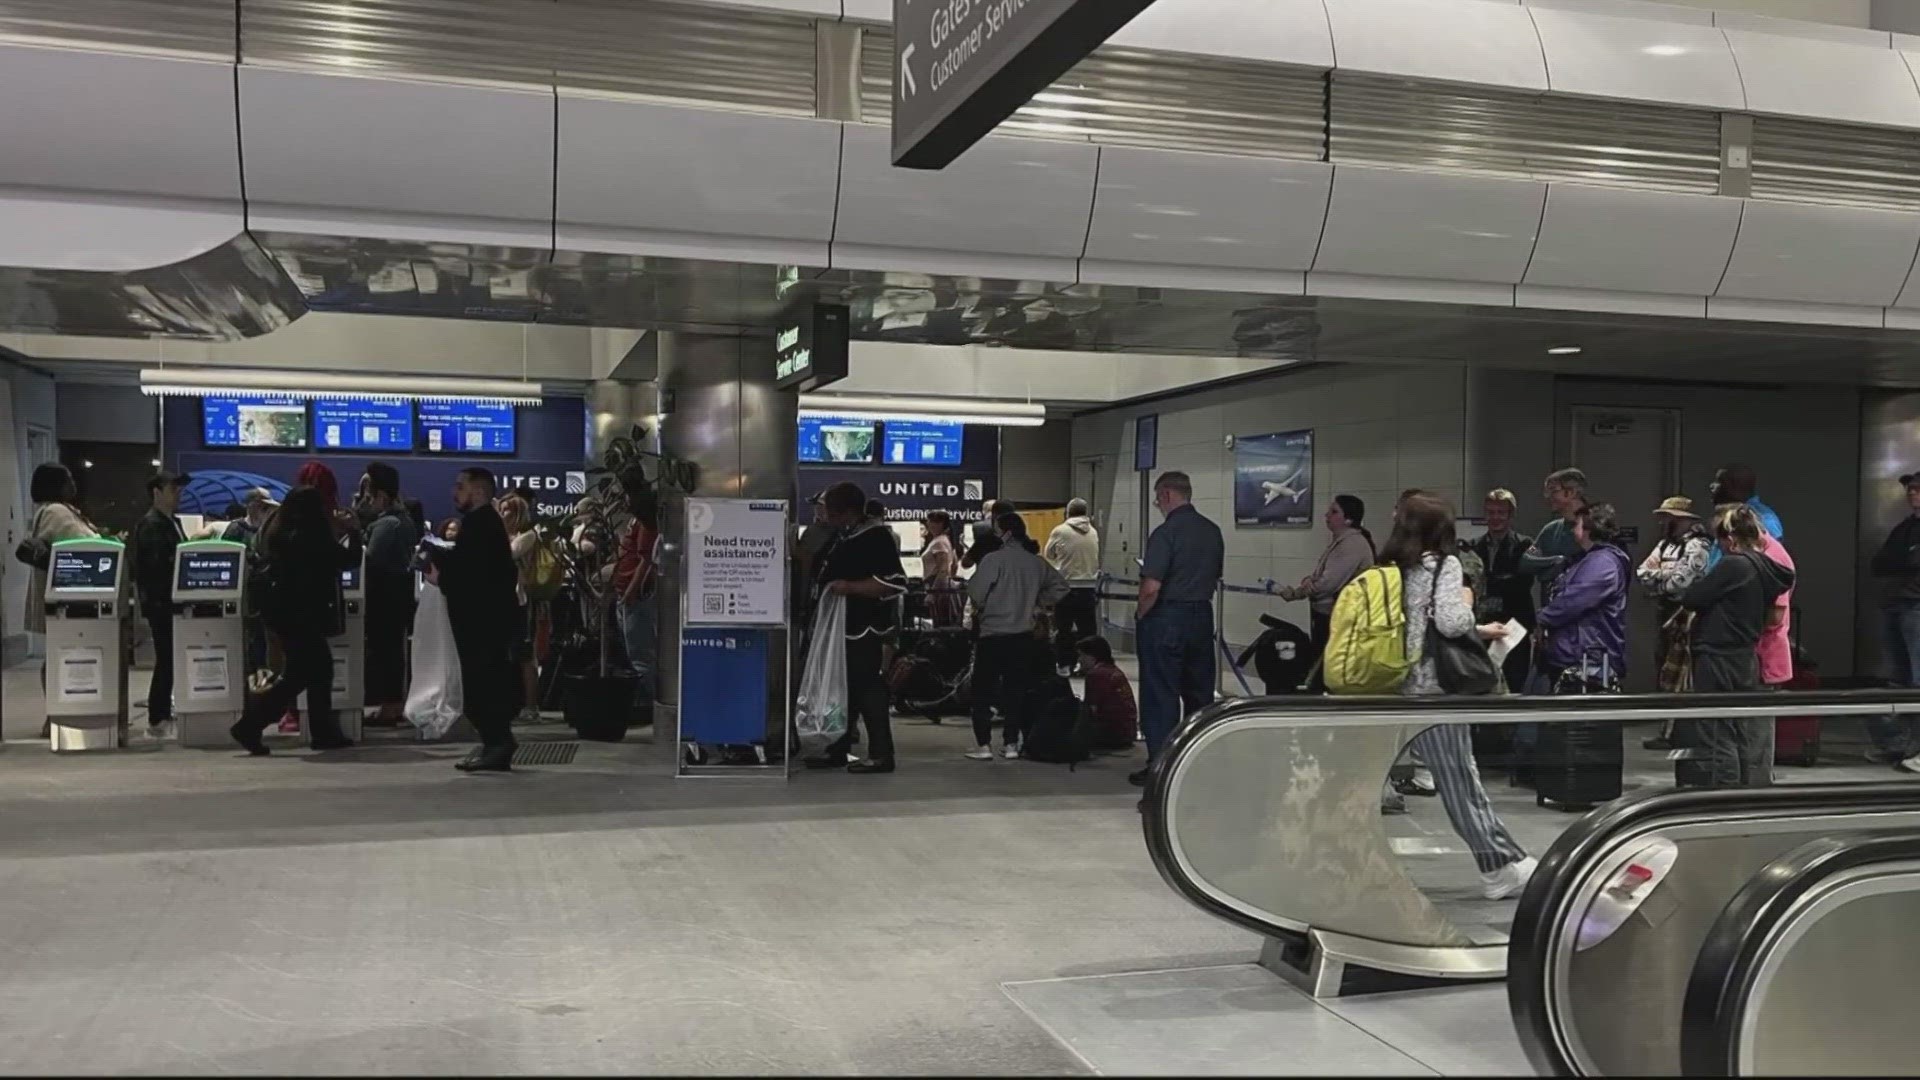 The travel woes continue at Denver International Airport (DIA) on Wednesday as flights are canceled and delayed nationwide on United Airlines.